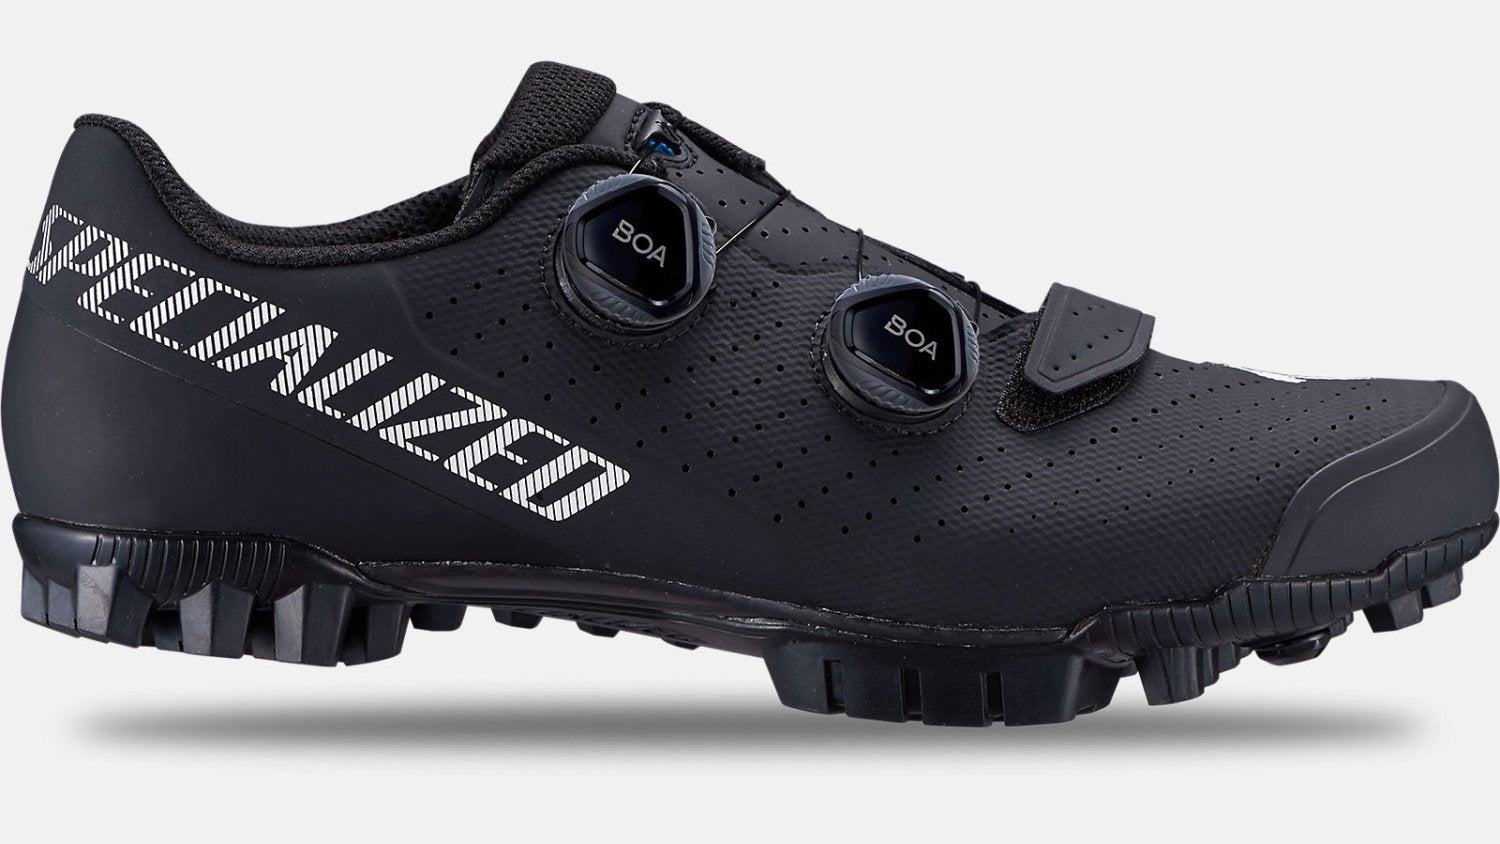 Specialized Recon 3.0 Mountain Bike Shoes - Liquid-Life